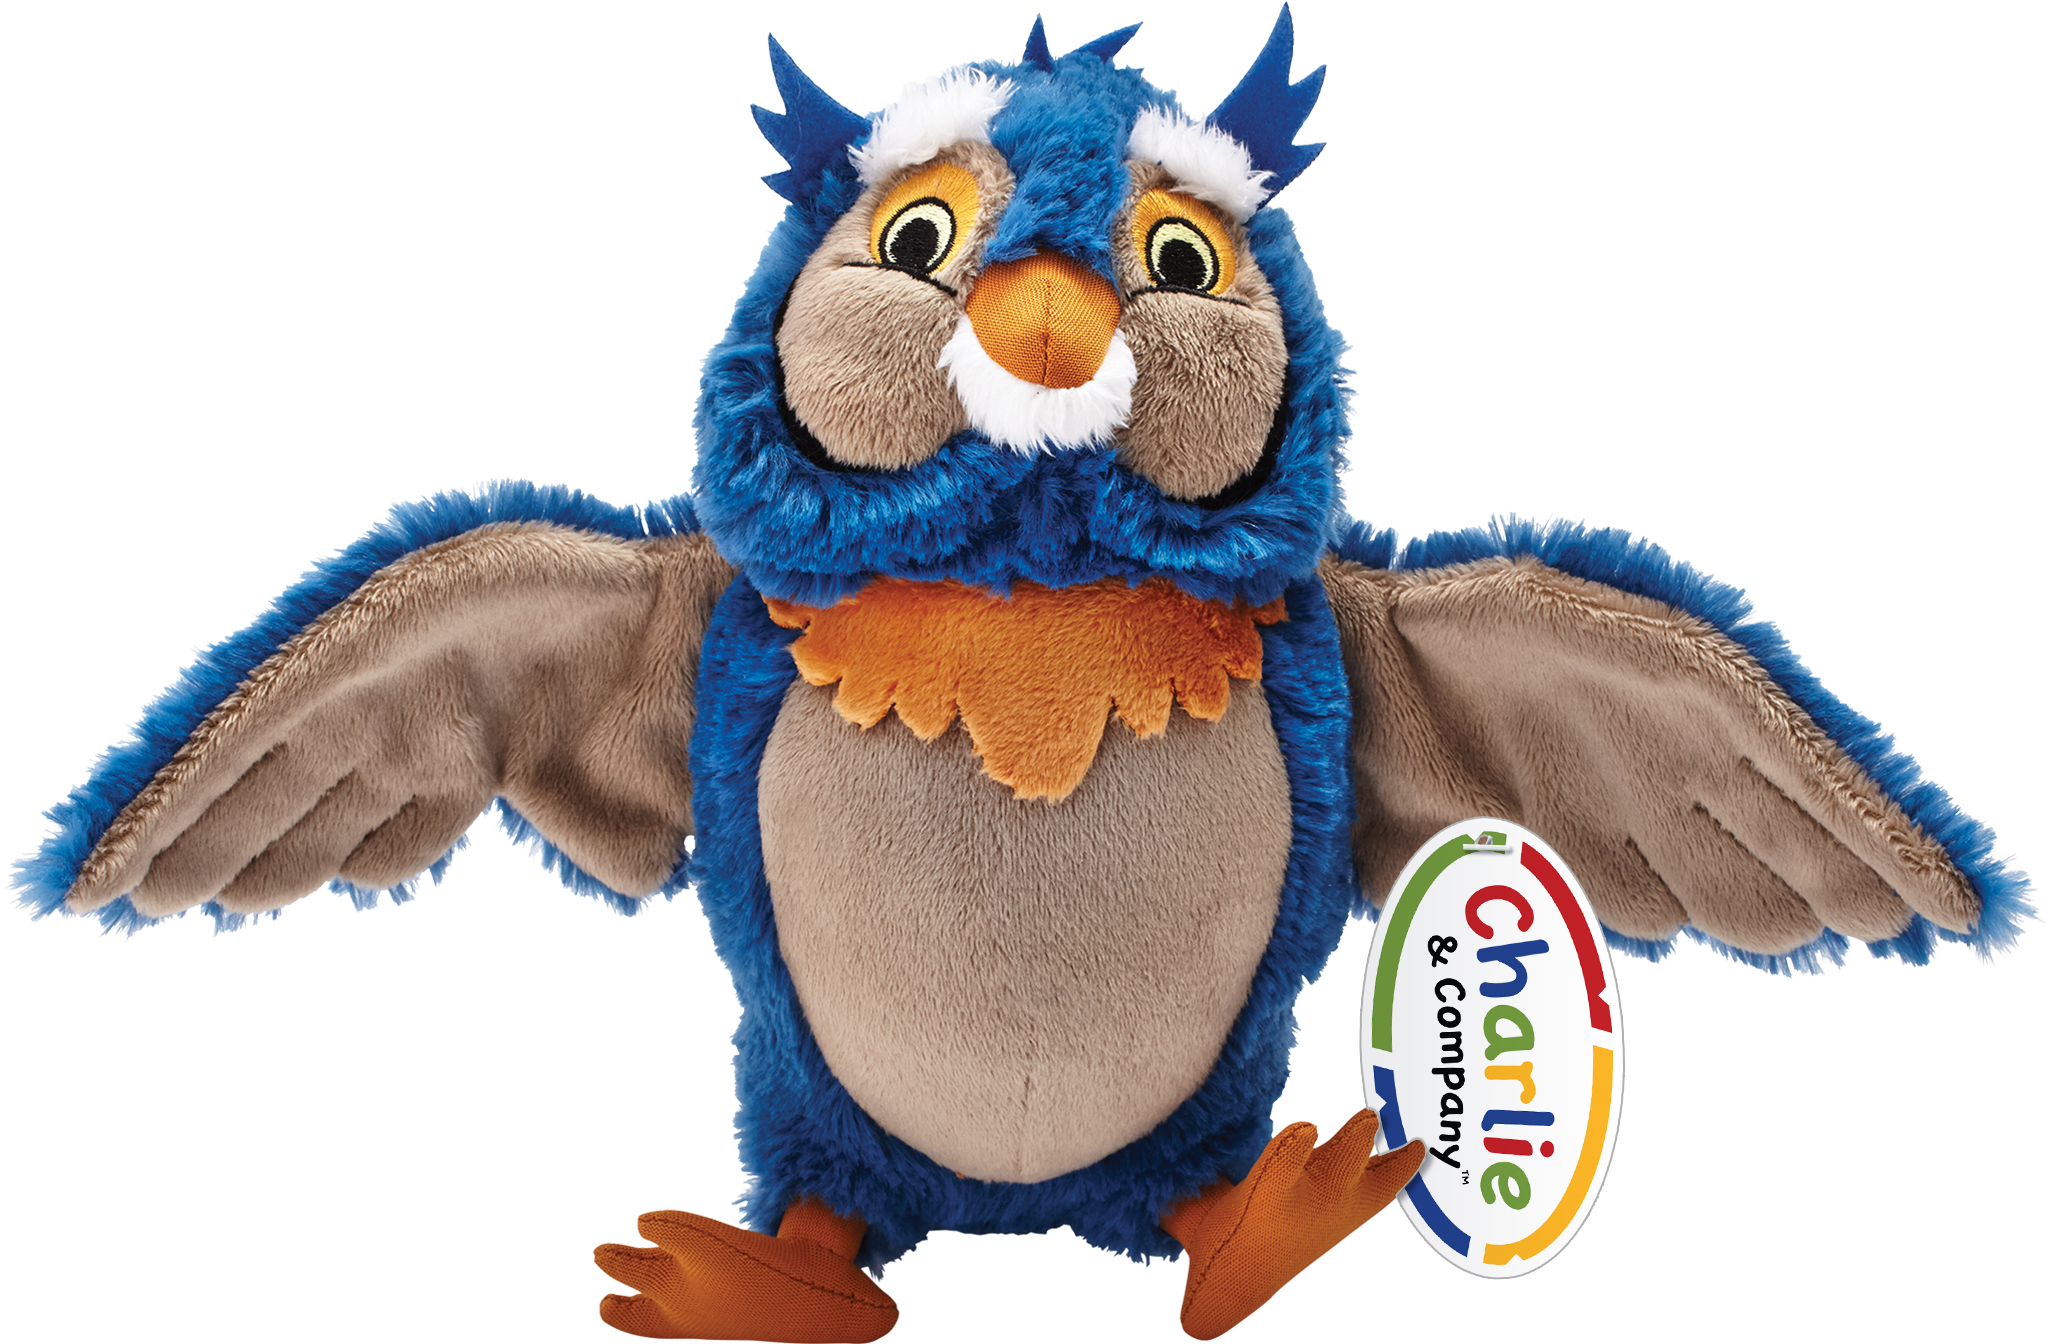 Children Will Love This Soft Socrates Plush Toy - School Zone Charlie & Company Socrates (2048x2048)